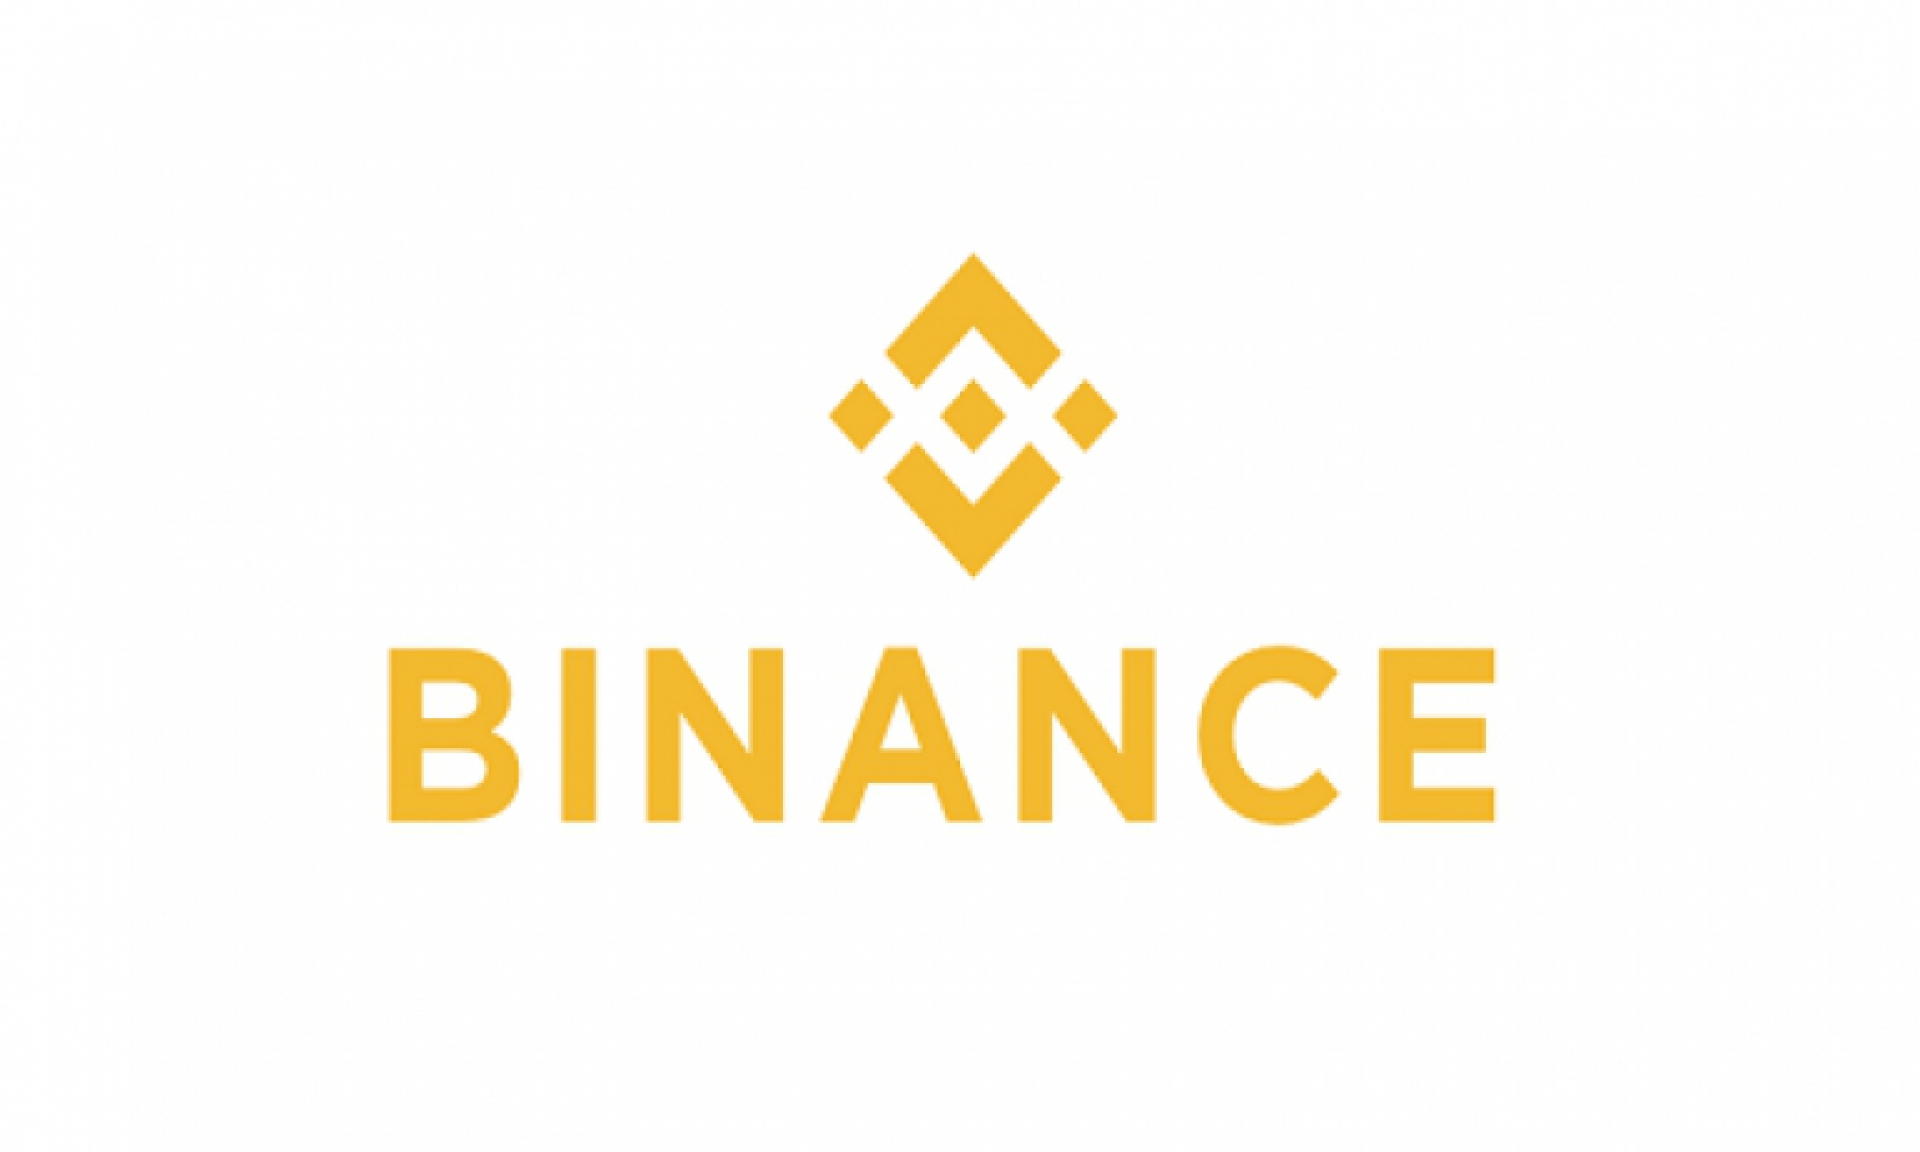 Binance exchange training along with how to deposit and withdraw